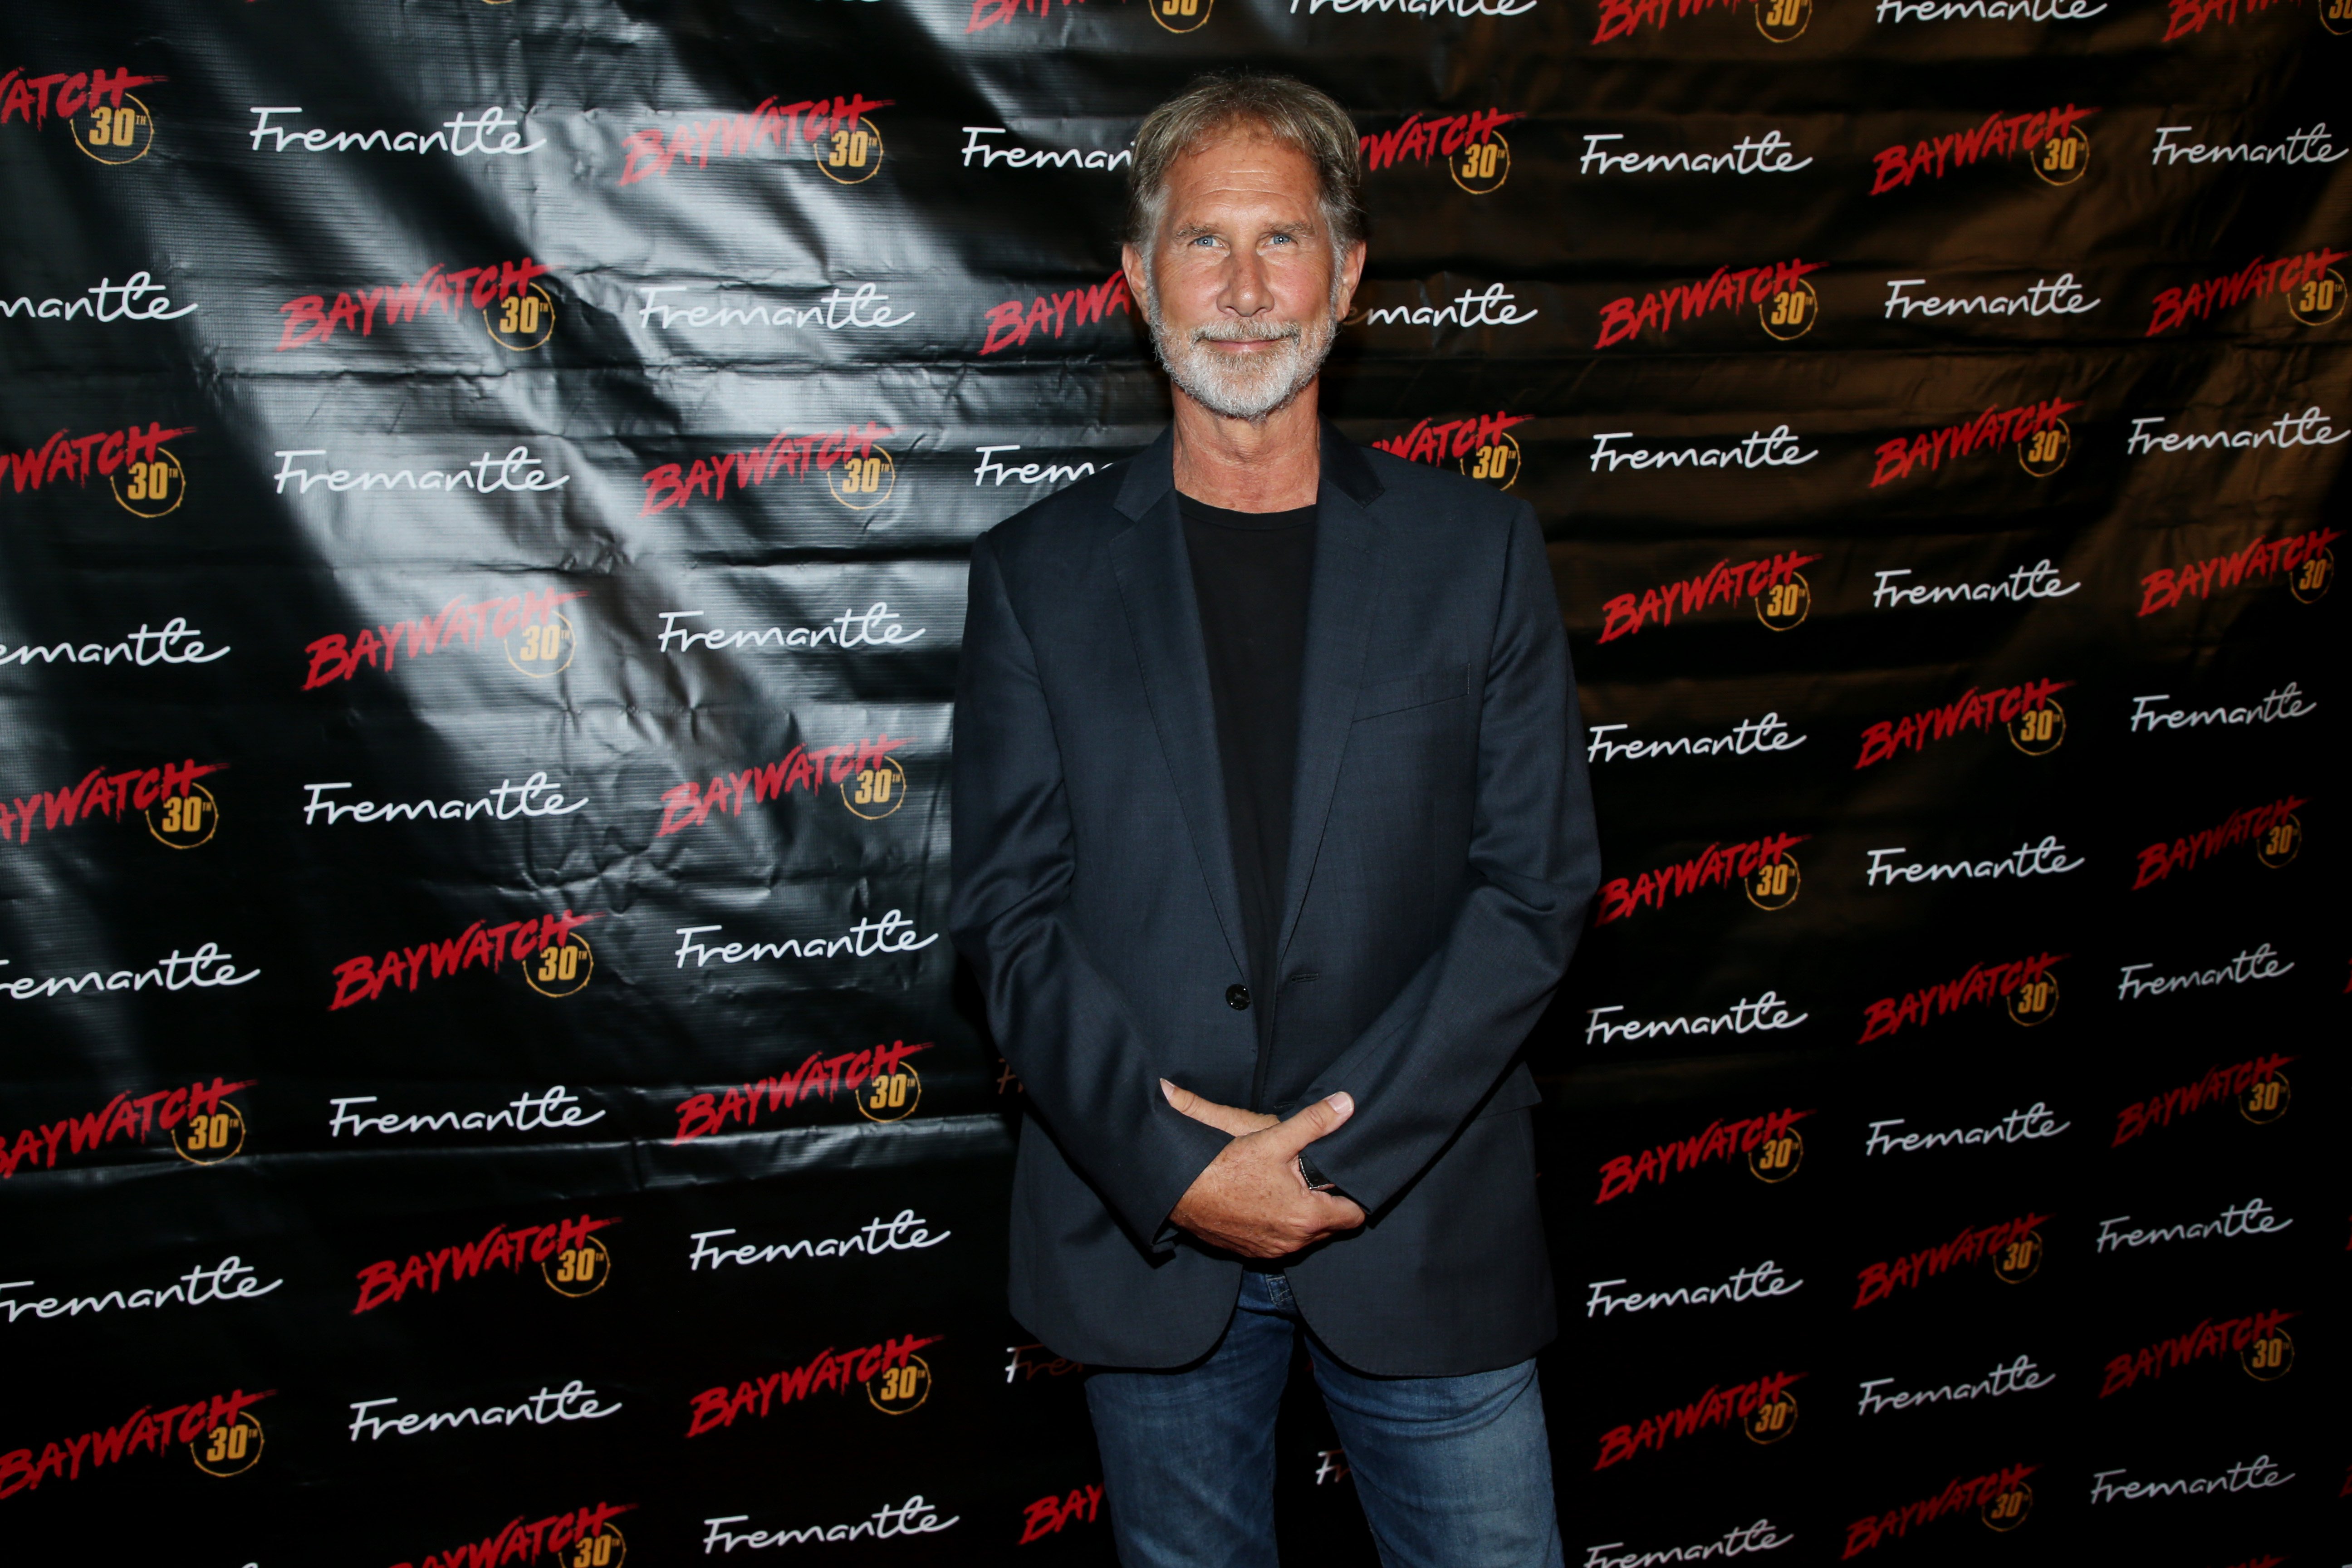 Parker Stevenson attends the 30th anniversary of "Baywatch" at the Viceroy Hotel on September 24, 2019 | Photo: GettyImages